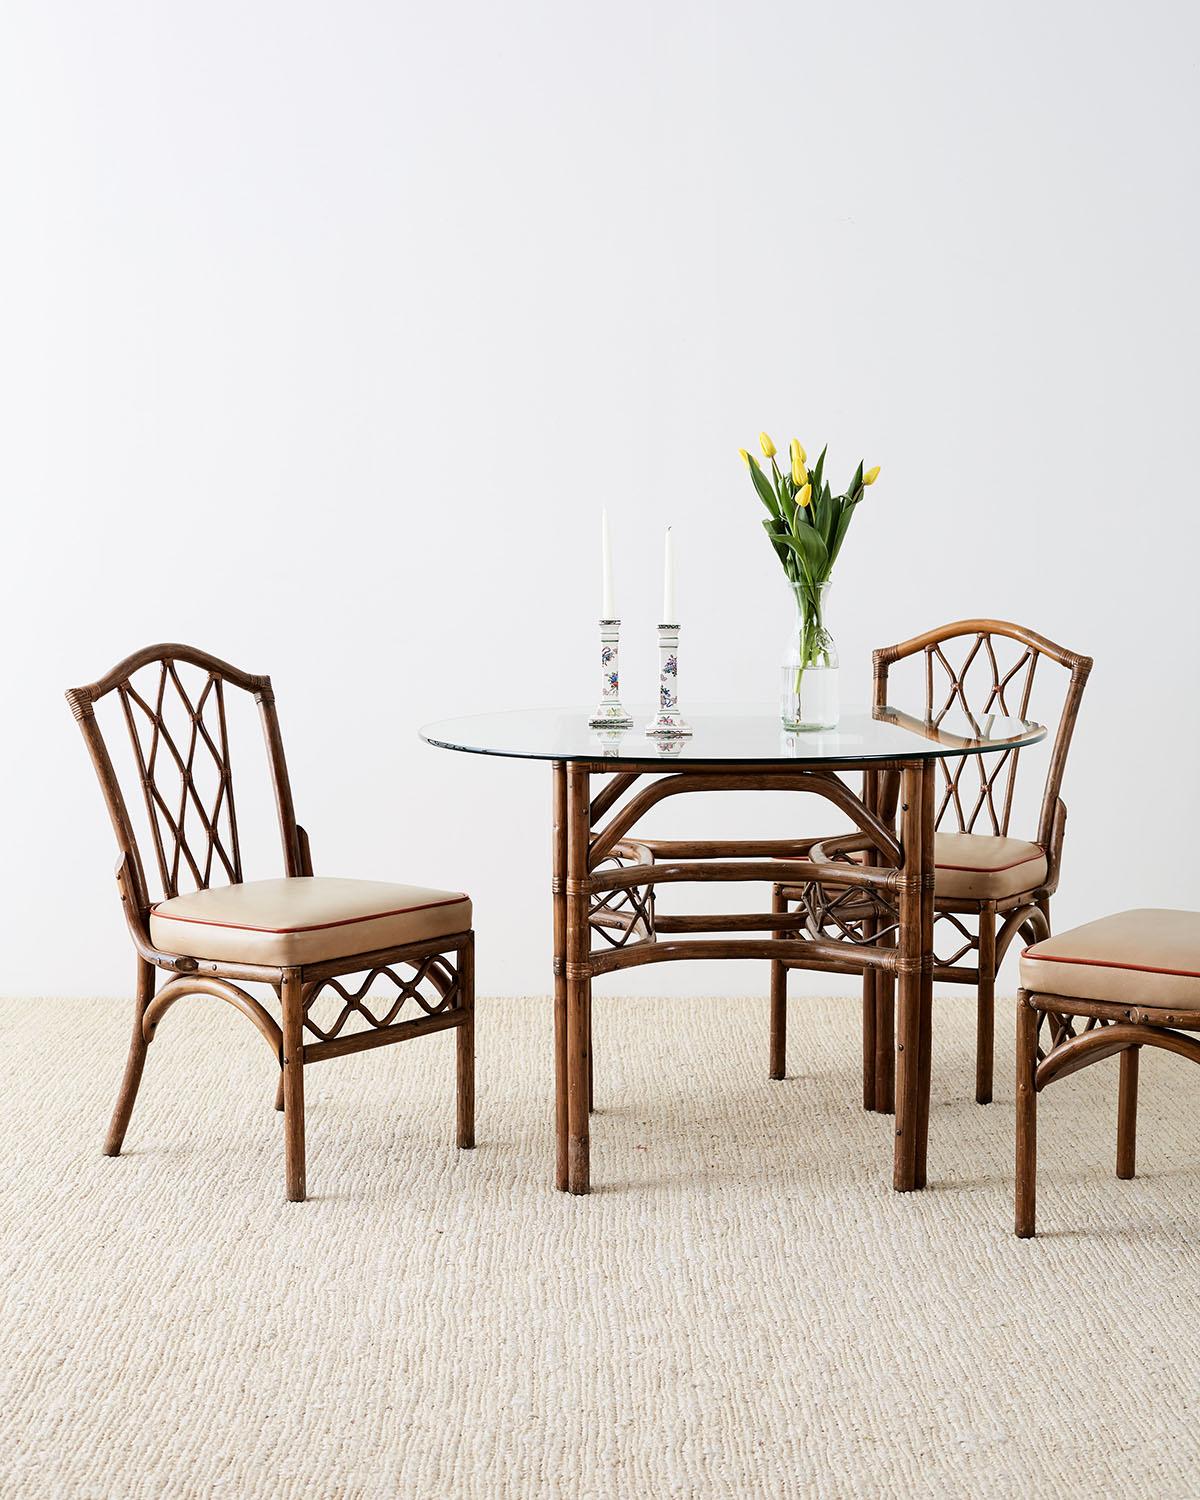 Stylish set of four bamboo rattan dining chairs by Brown Jordan. Featuring a bent rattan frame decorated with the Brown Jordan style lattice design on the splat and apron. The seat backs have a hump back crest and each seat is topped with a faux